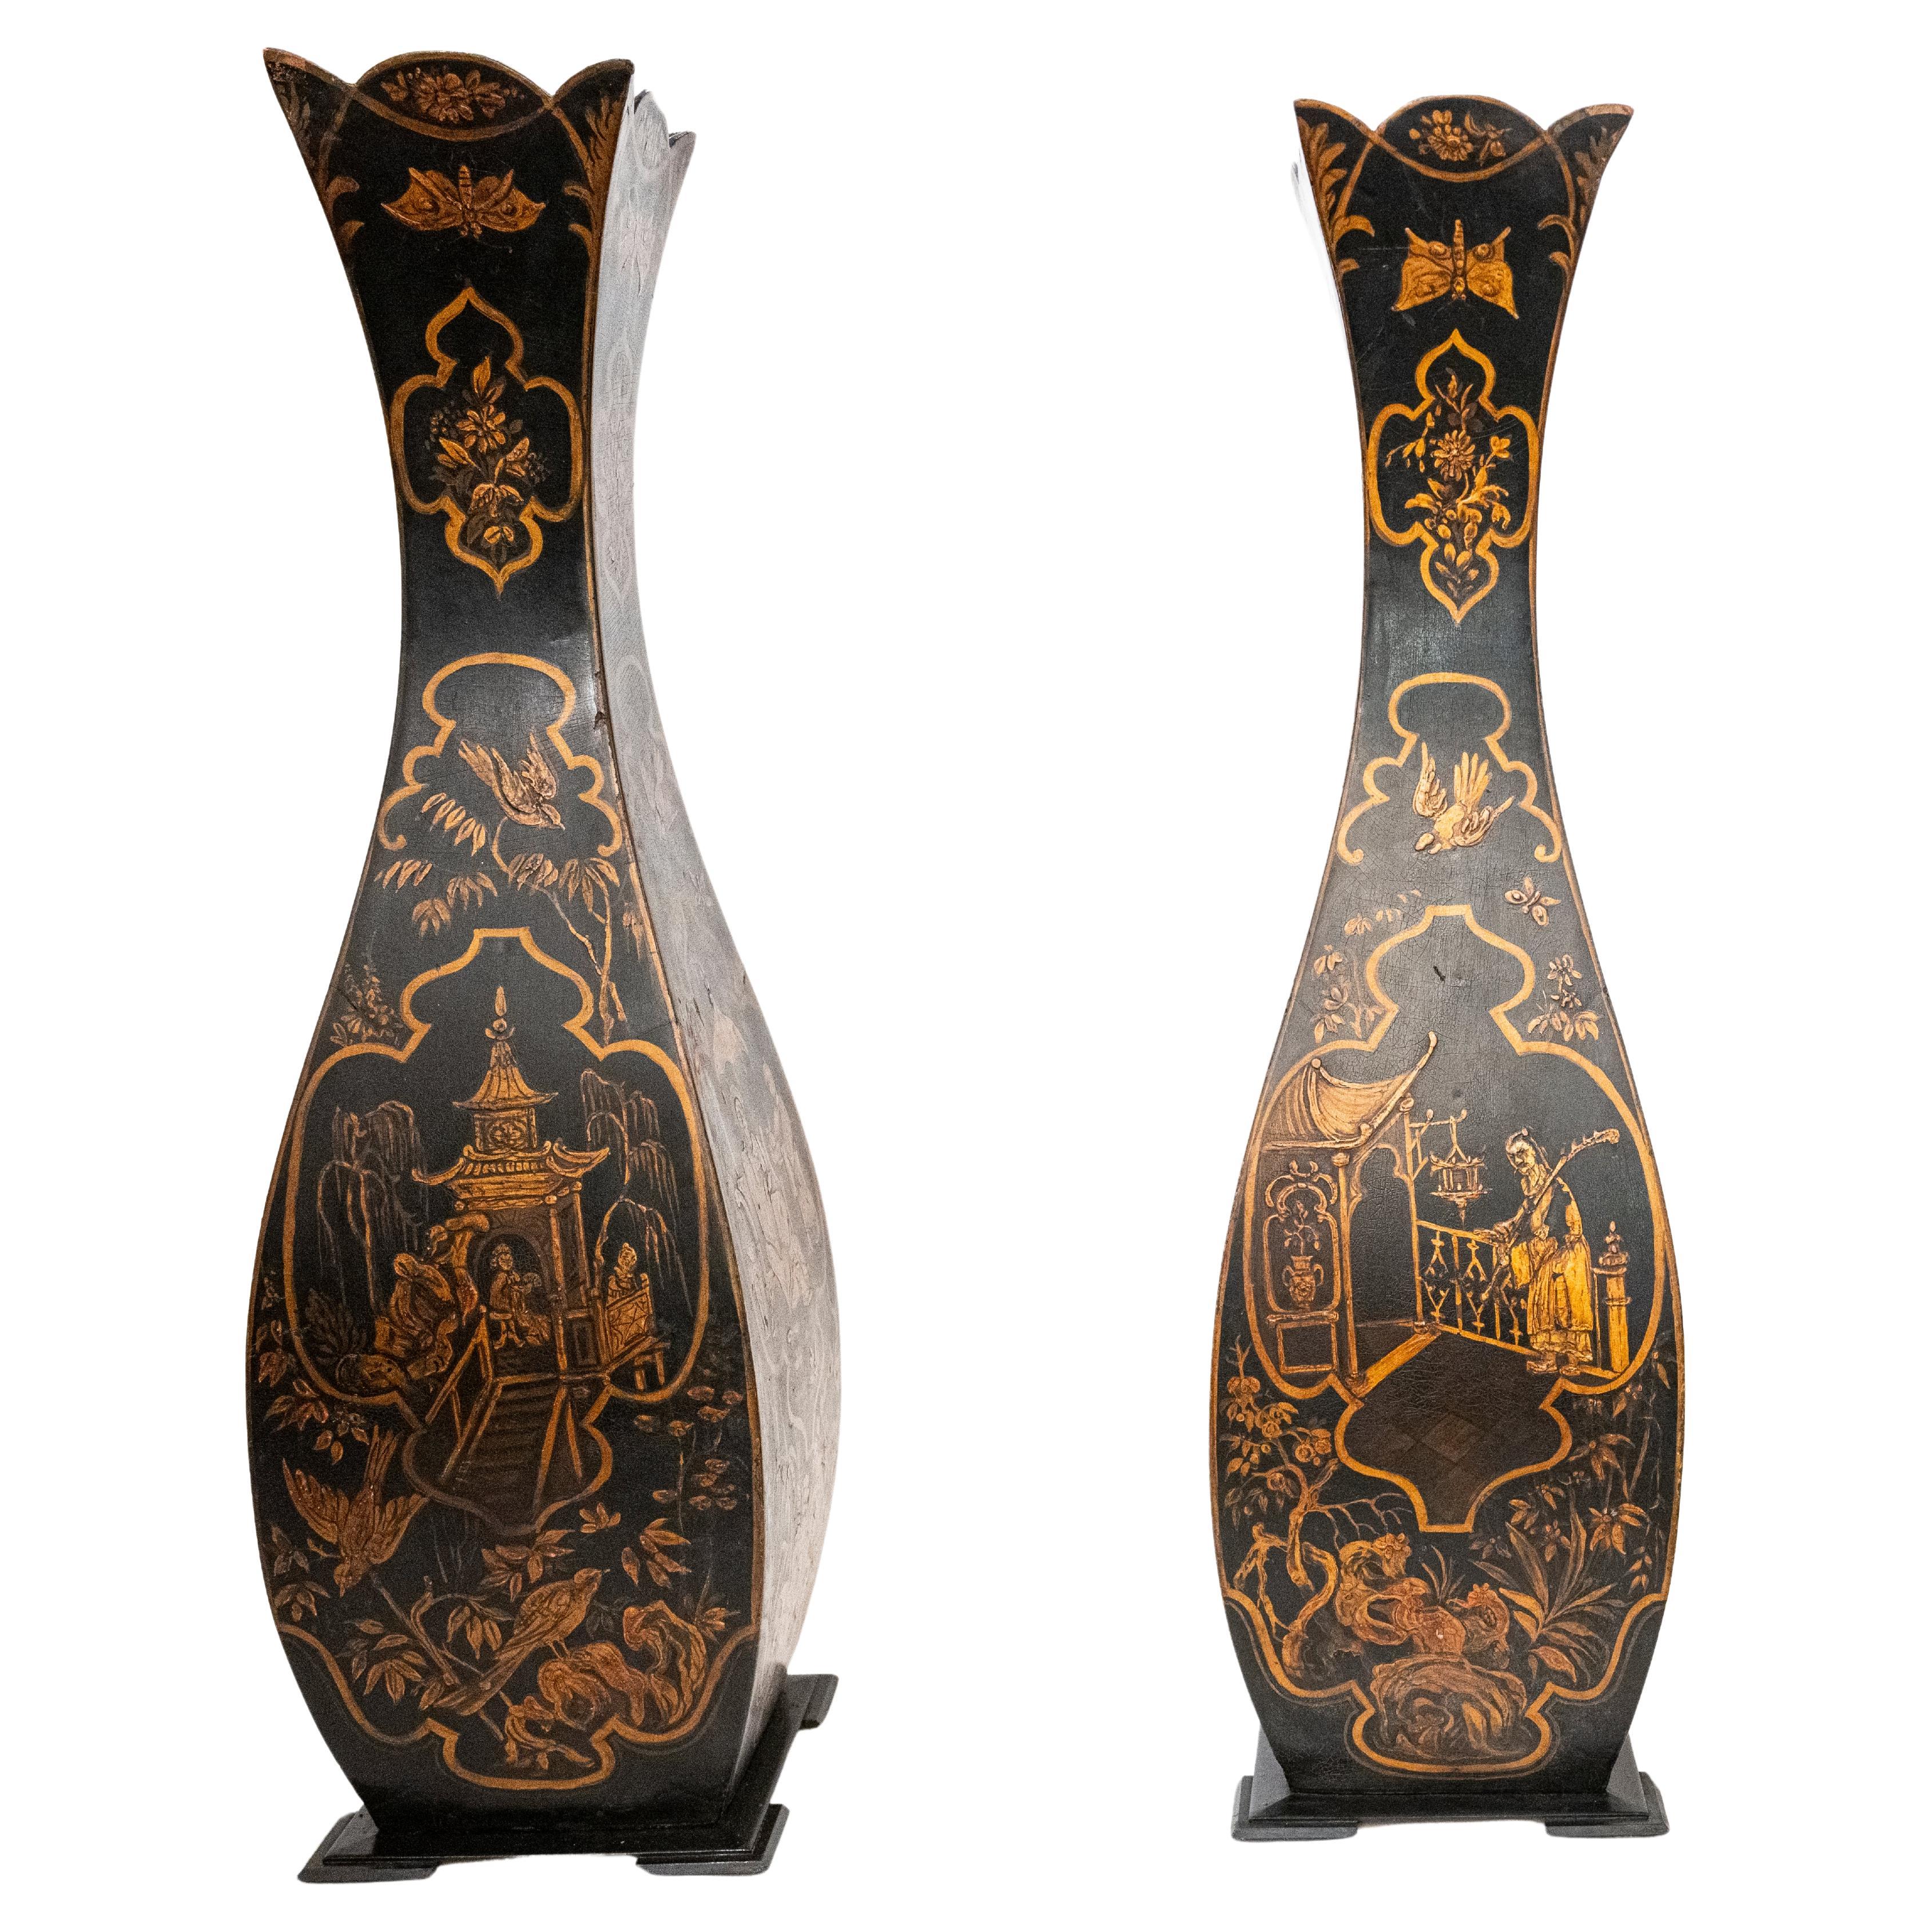 A Pair of English Wood and Paper Mache Oversized Vases